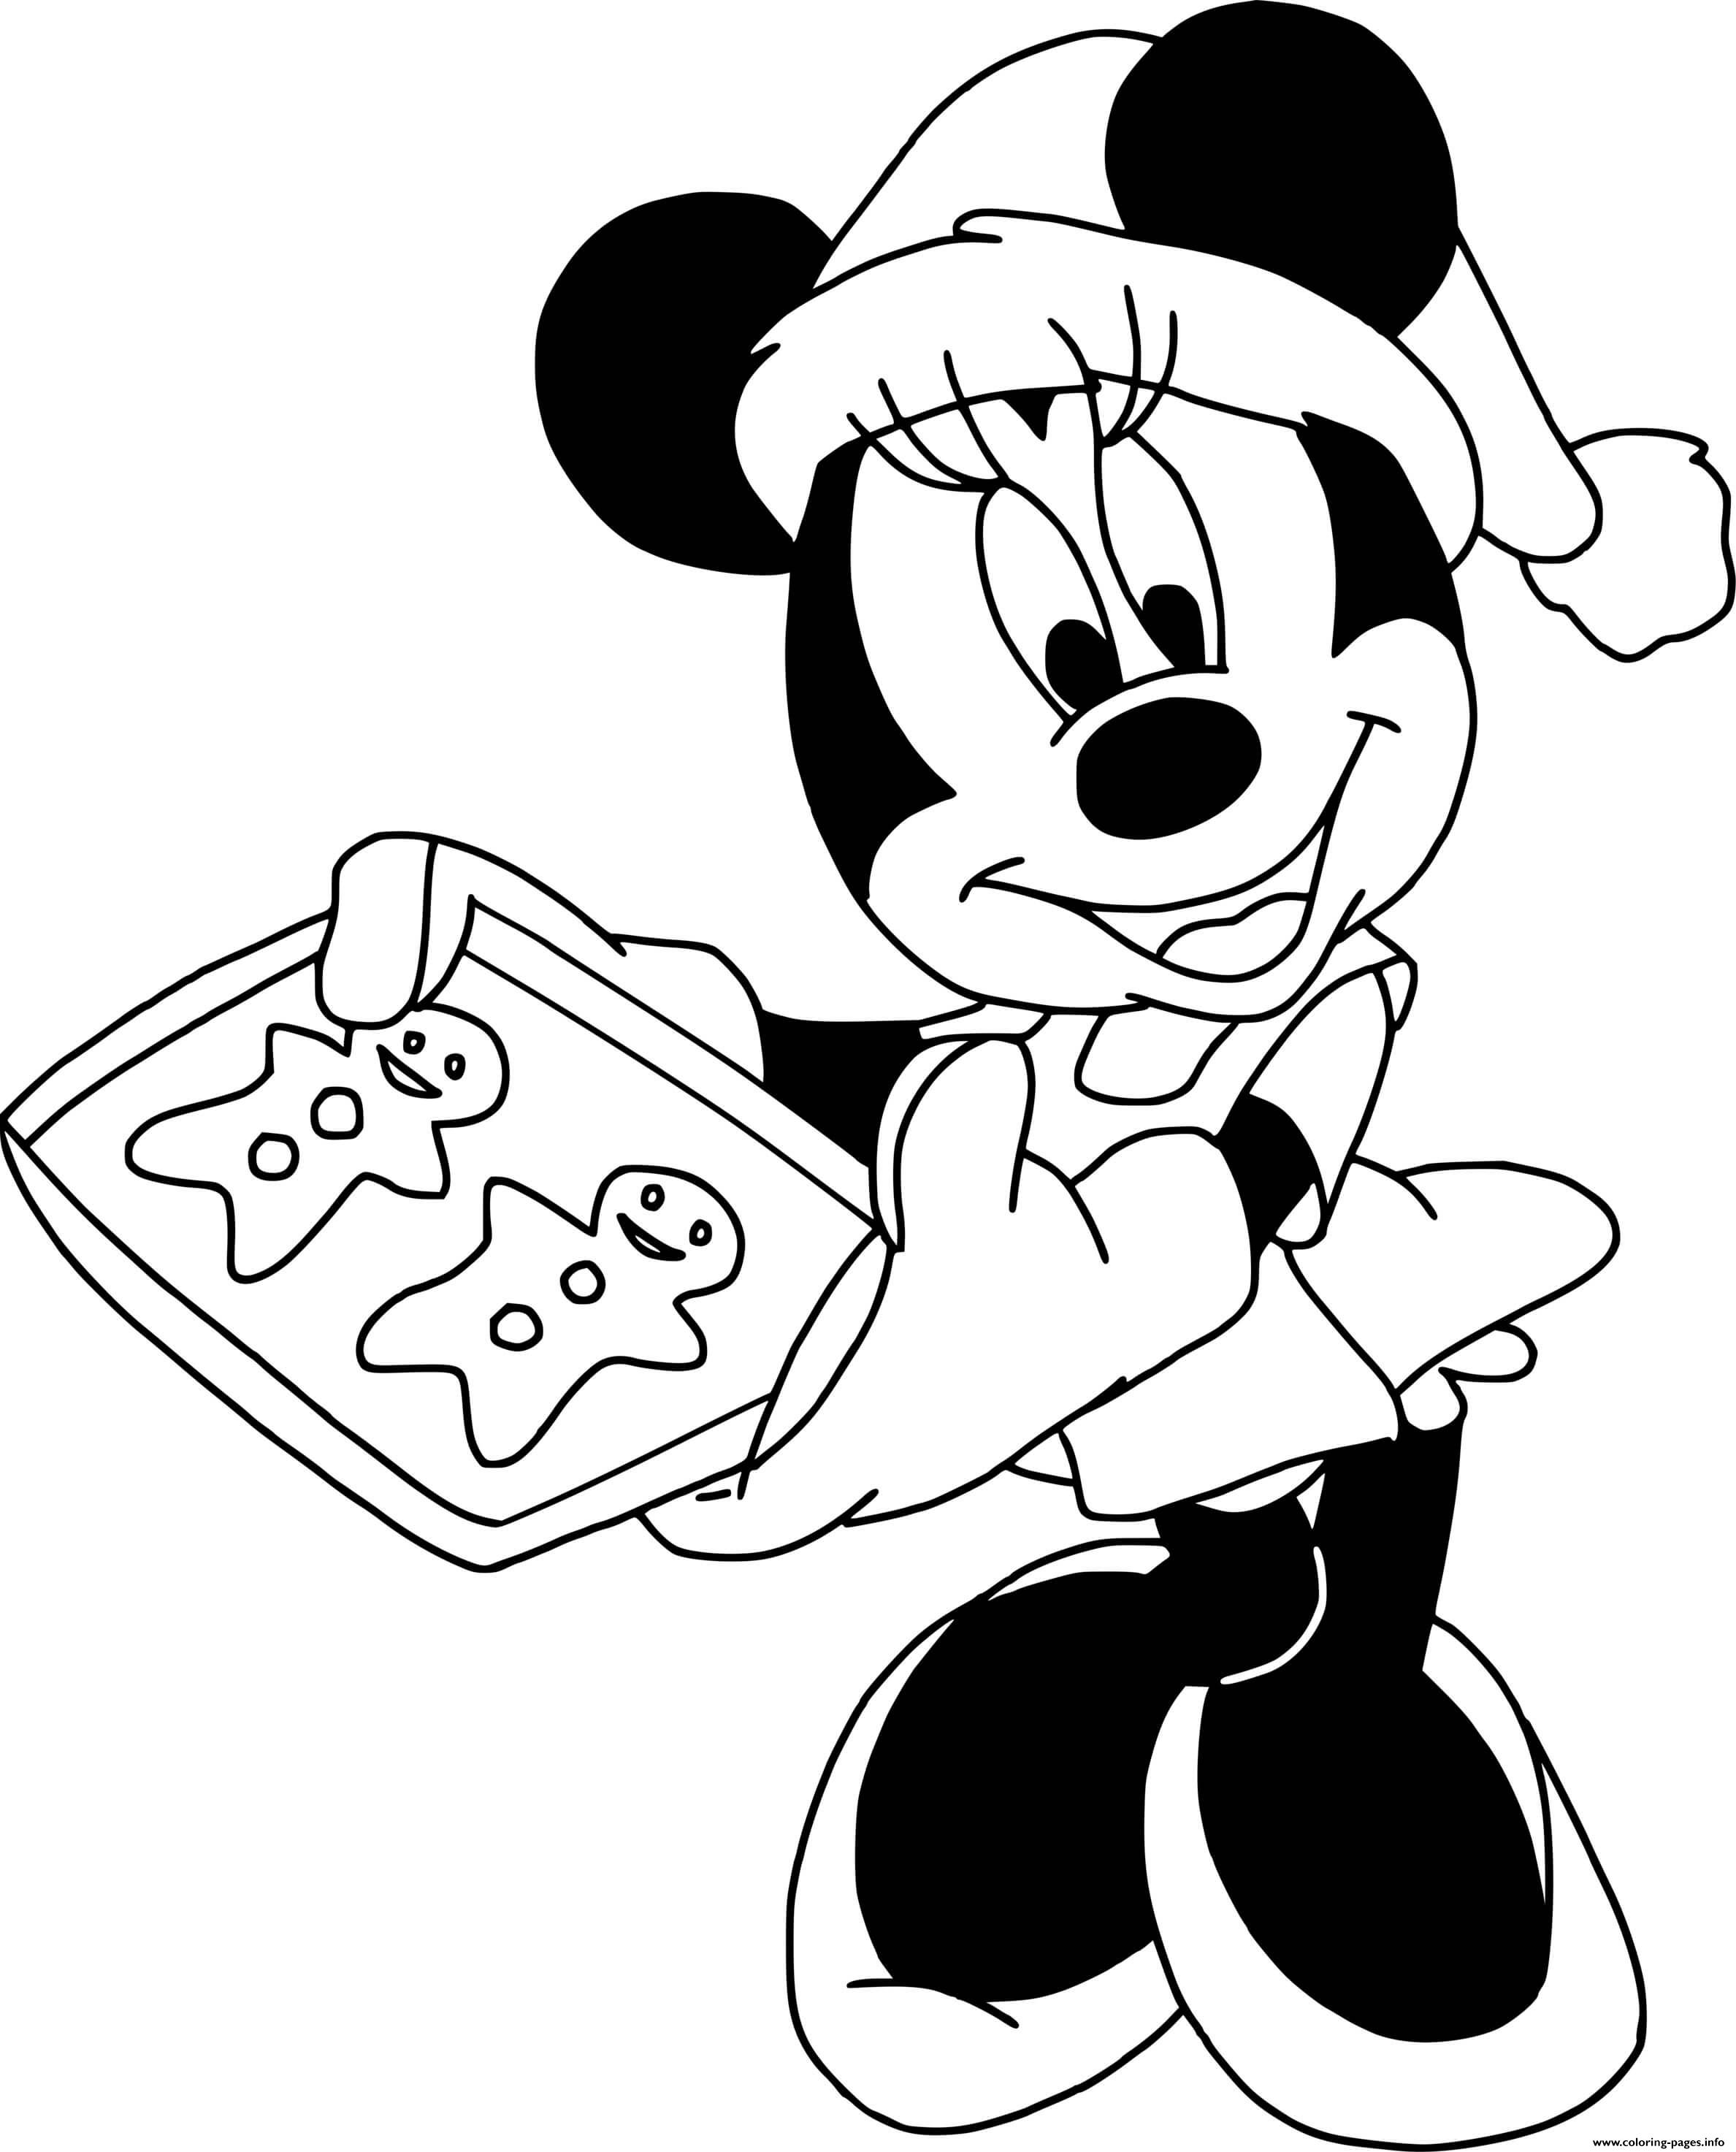 Minnie gingerbread coloring page printable